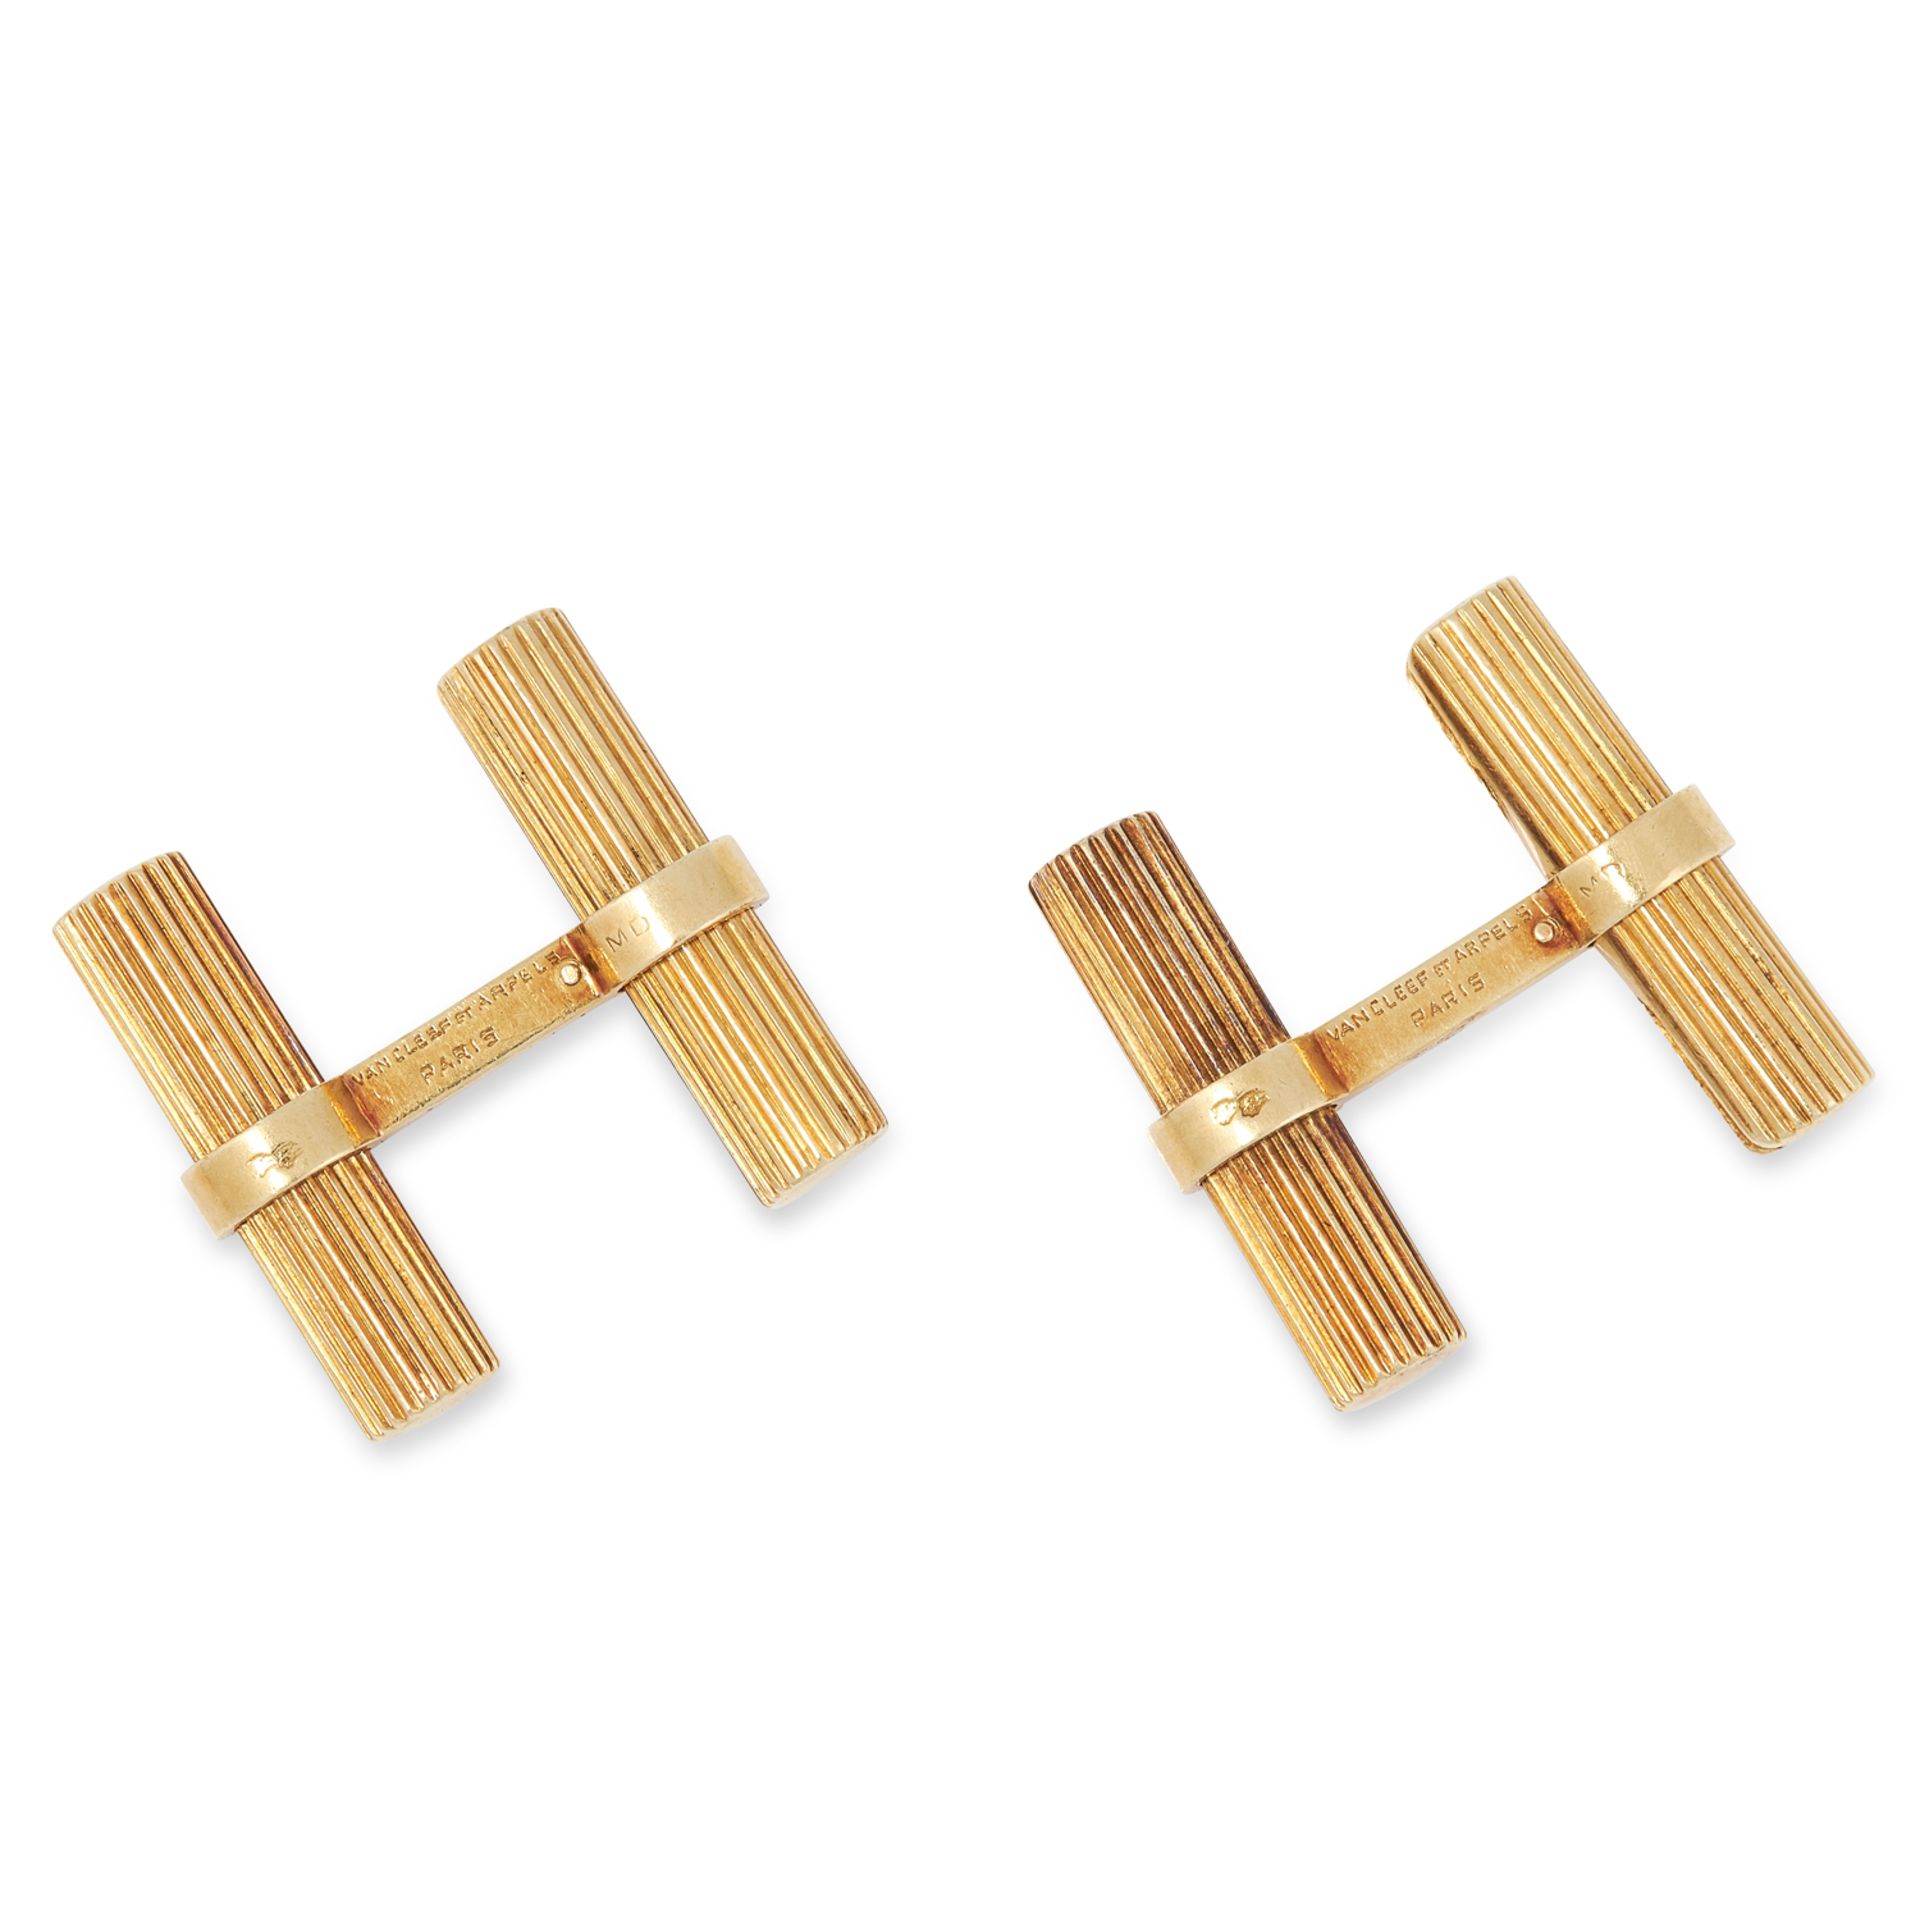 A PAIR OF TEXTURED BATTON CUFFLINKS, VAN CLEEF & ARPELS comprising of textured battons, signed and